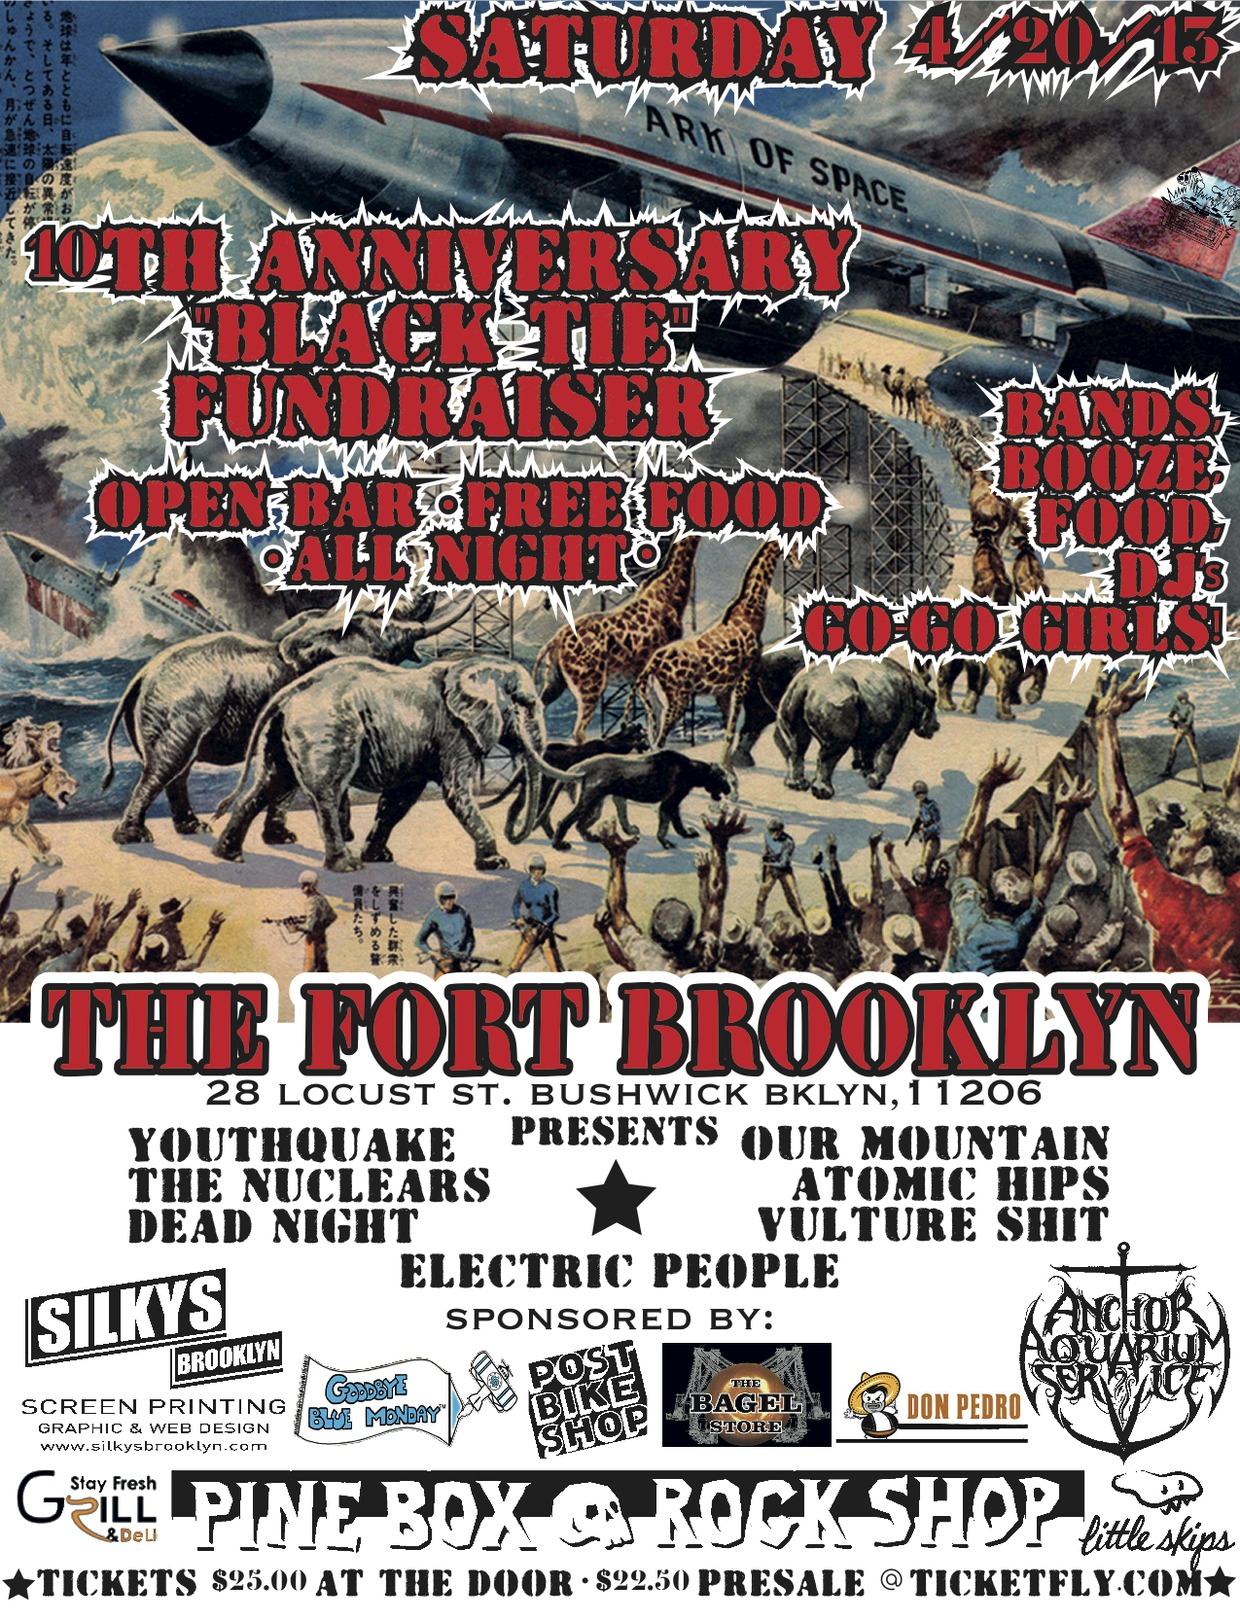 Recording Studio The Fort Brooklyn is Throwing a Black Tie Rock’n’Roll Benefit